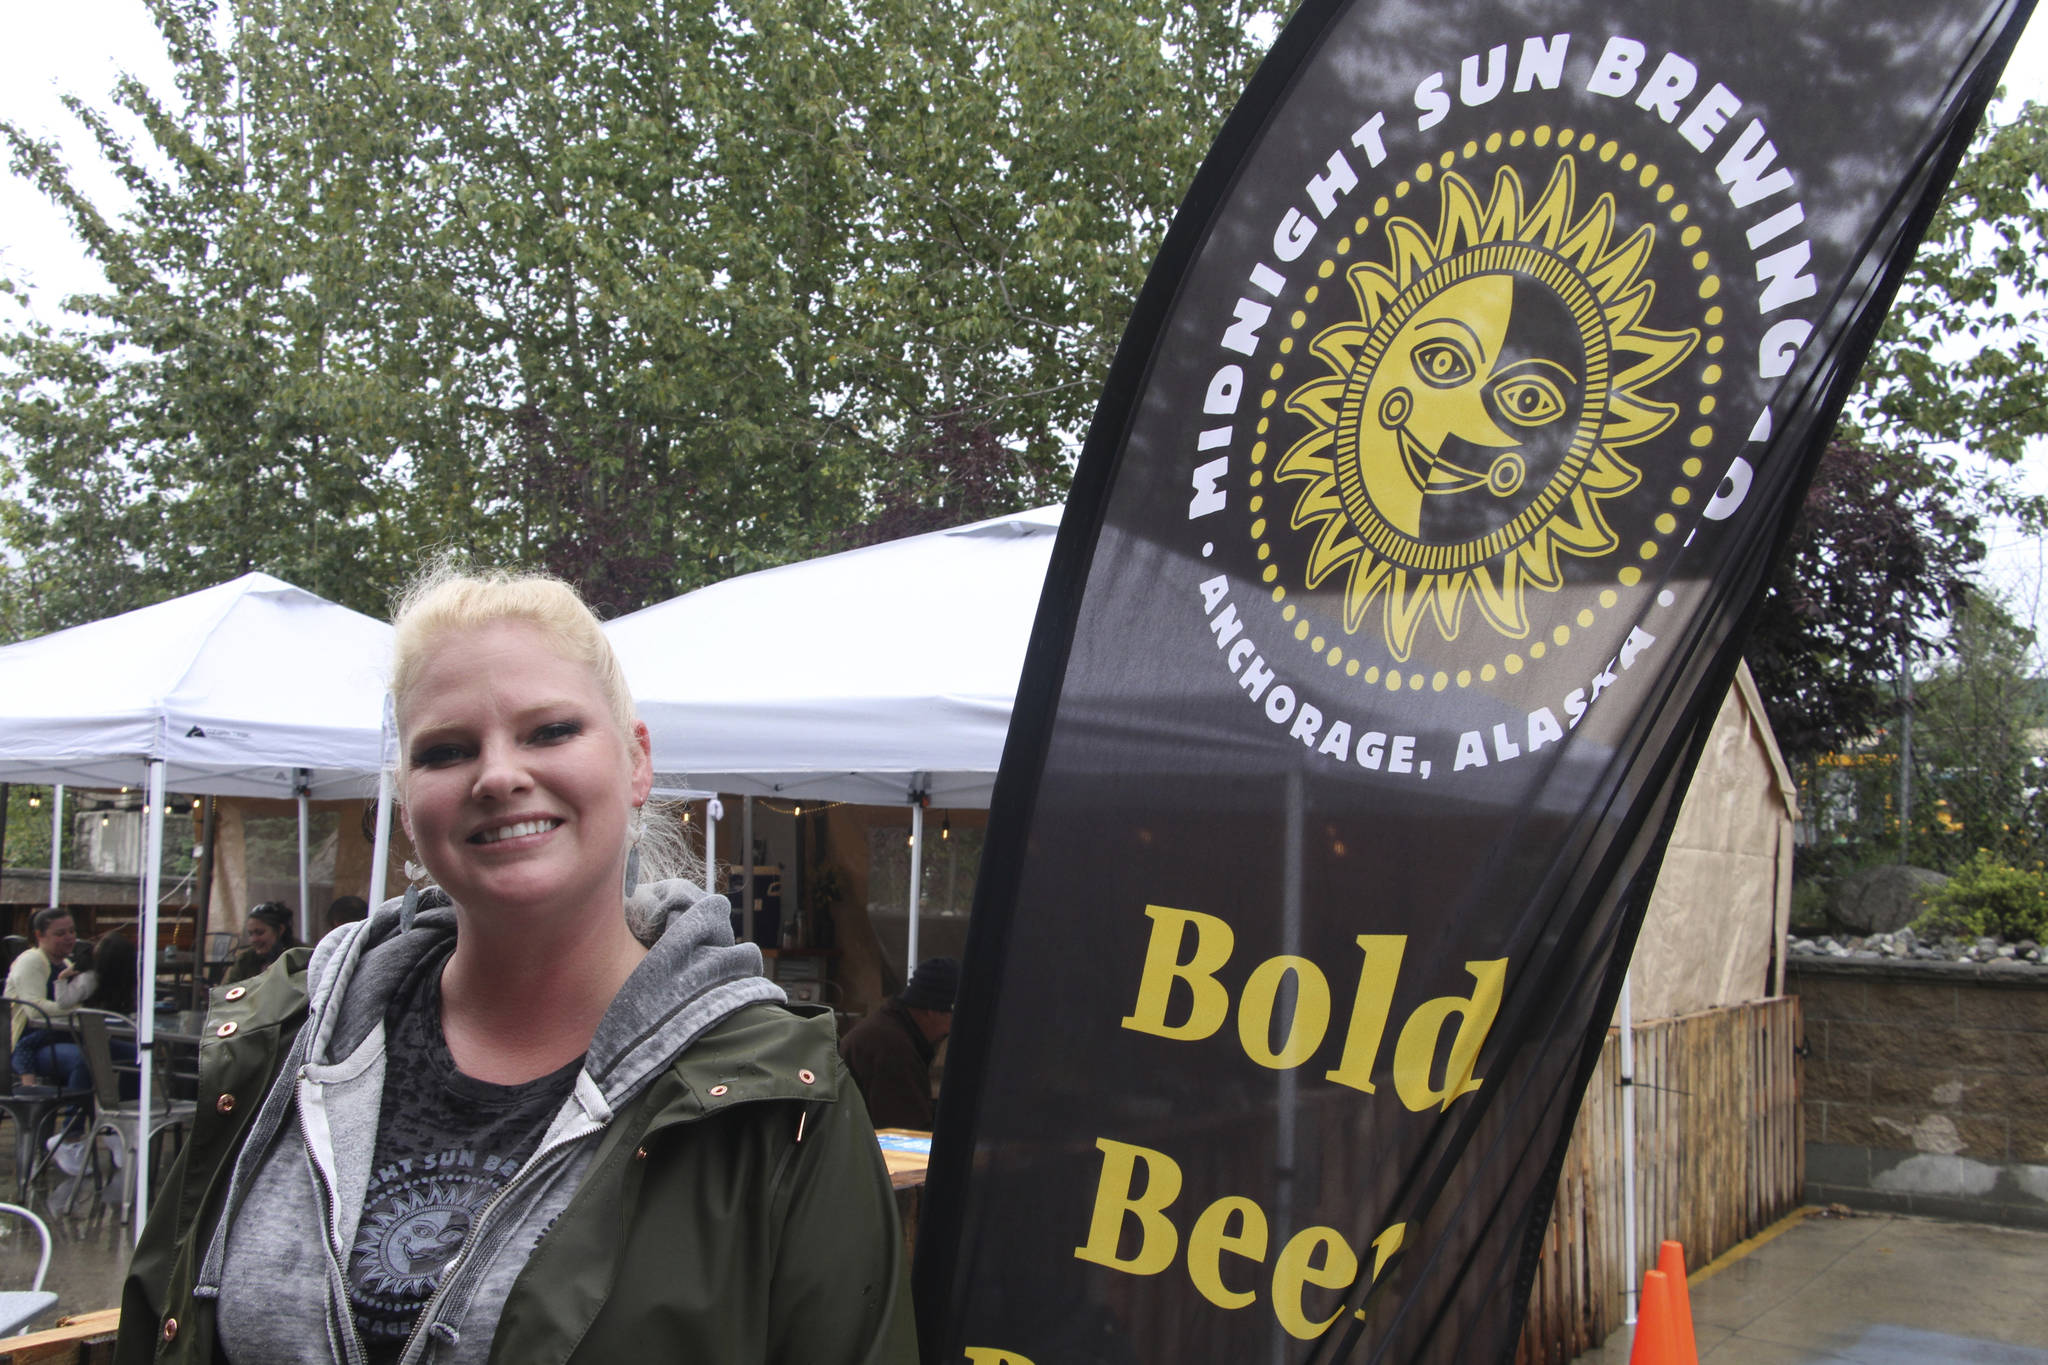 Angelina Backus poses for a photo at the Midnight Sun Brewing Co., Monday, Aug. 24, 2020, in Anchorage, Alaska. Backus, who is a lead server at the brewery, received a $500 tip from Jack Little, and said it helped her pay bills that were piling up during the coronavirus pandemic. (AP Photo / Mark Thiessen)